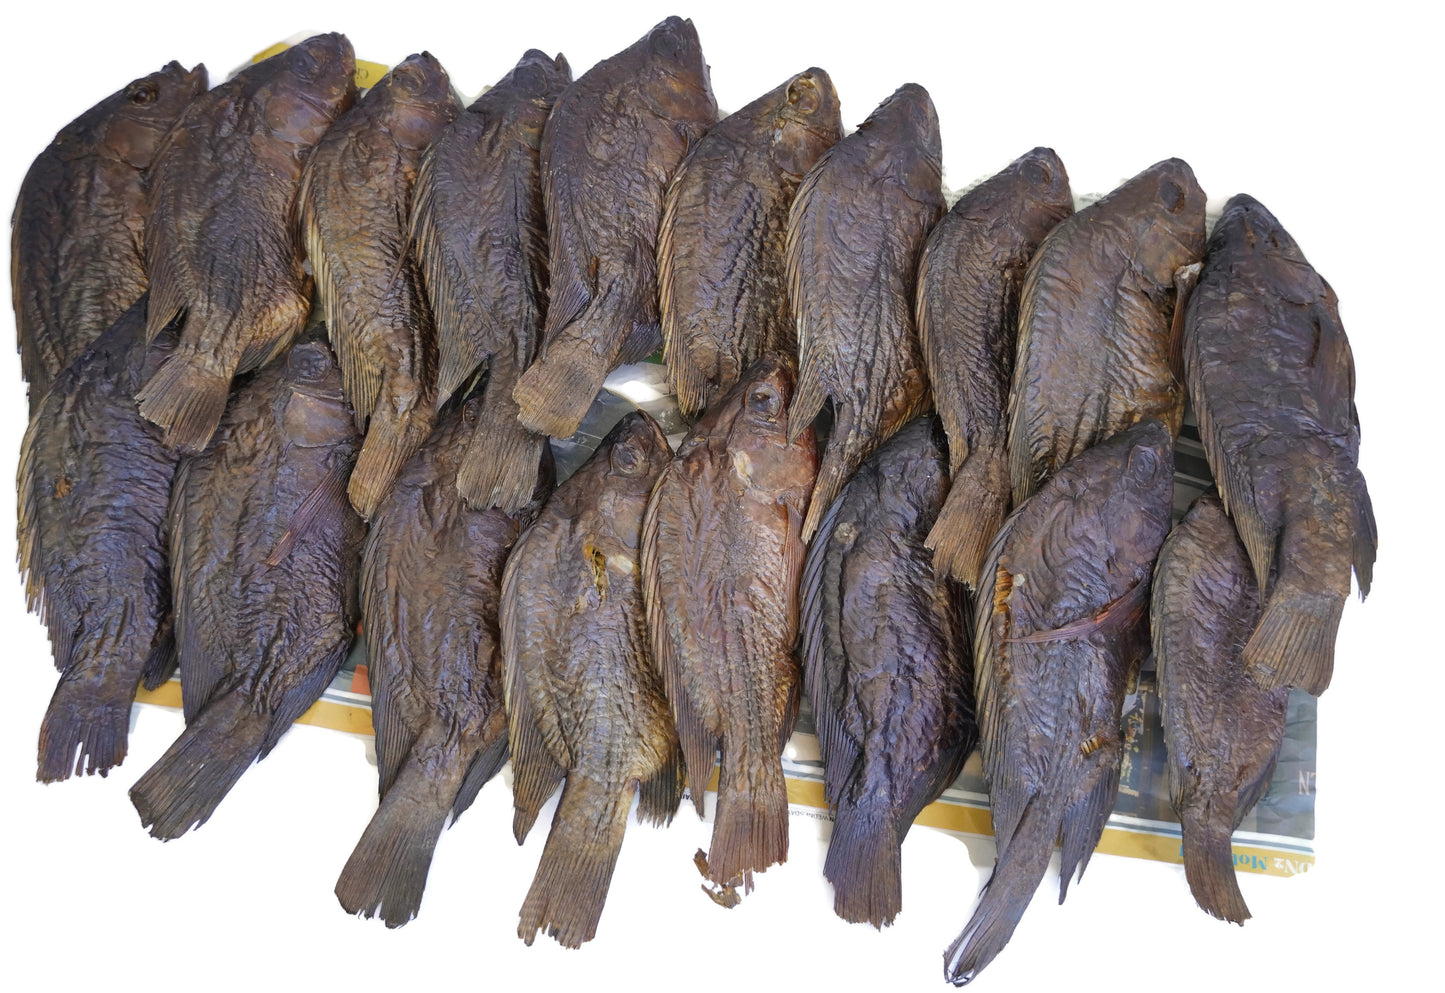 Natural Sun Dried Tilapia (Obambla) Whole Smoked Tilapia from Lake Victoria listed price one each